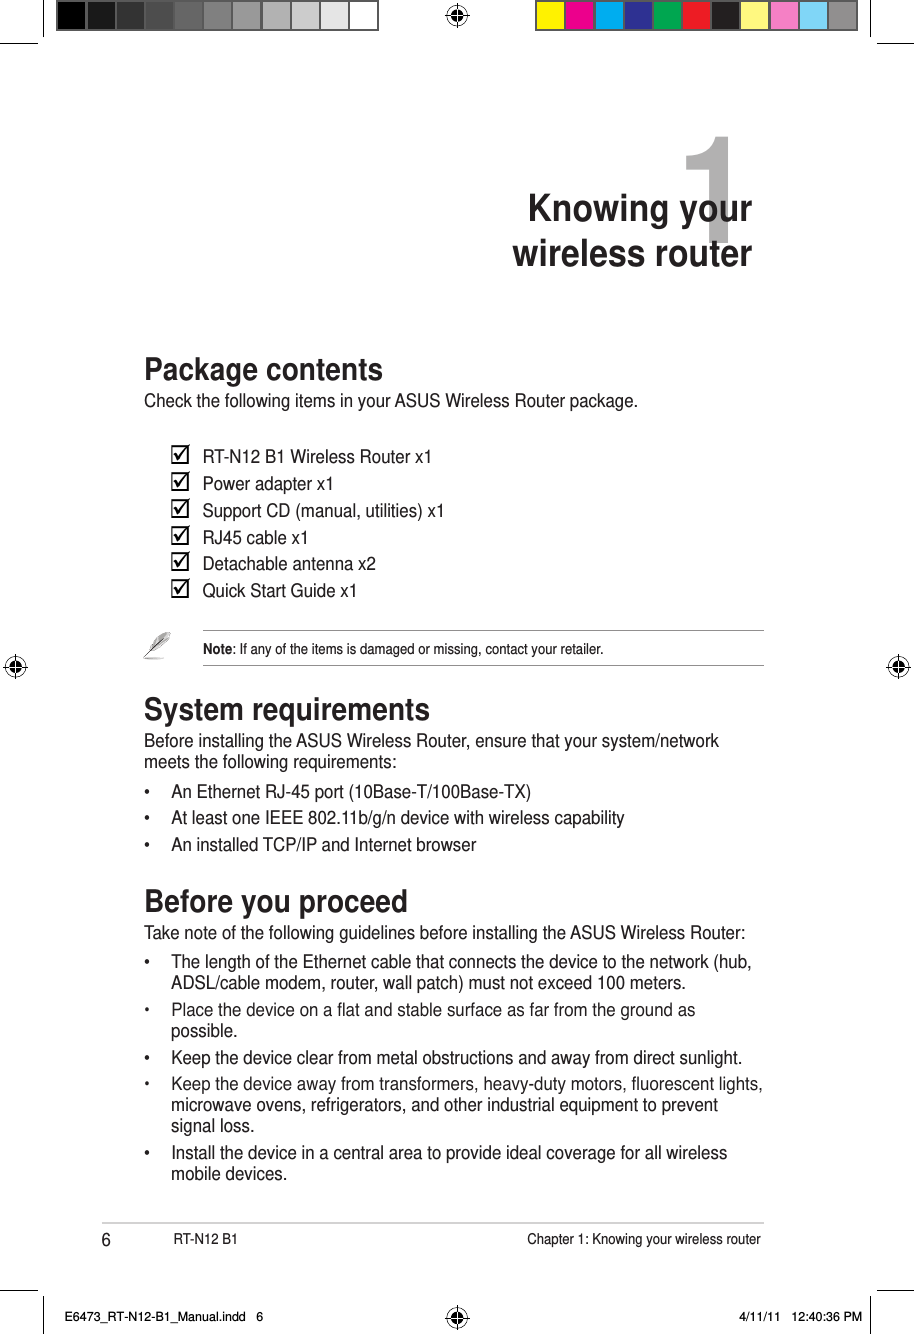 6RT-N12 B1                    Chapter 1: Knowing your wireless router1Knowing your  wireless routerPackage contentsCheck the following items in your ASUS Wireless Router package.     RT-N12 B1 Wireless Router x1    Power adapter x1    Support CD (manual, utilities) x1    RJ45 cable x1    Detachable antenna x2    Quick Start Guide x1Note: If any of the items is damaged or missing, contact your retailer.System requirementsBefore installing the ASUS Wireless Router, ensure that your system/network meets the following requirements:•  An Ethernet RJ-45 port (10Base-T/100Base-TX)•  At least one IEEE 802.11b/g/n device with wireless capability•  An installed TCP/IP and Internet browserBefore you proceedTake note of the following guidelines before installing the ASUS Wireless Router:•  The length of the Ethernet cable that connects the device to the network (hub, ADSL/cable modem, router, wall patch) must not exceed 100 meters.•  Place the device on a at and stable surface as far from the ground as possible.•  Keep the device clear from metal obstructions and away from direct sunlight.•  Keep the device away from transformers, heavy-duty motors, uorescent lights, microwave ovens, refrigerators, and other industrial equipment to prevent signal loss.•  Install the device in a central area to provide ideal coverage for all wireless mobile devices.E6473_RT-N12-B1_Manual.indd   6 4/11/11   12:40:36 PM